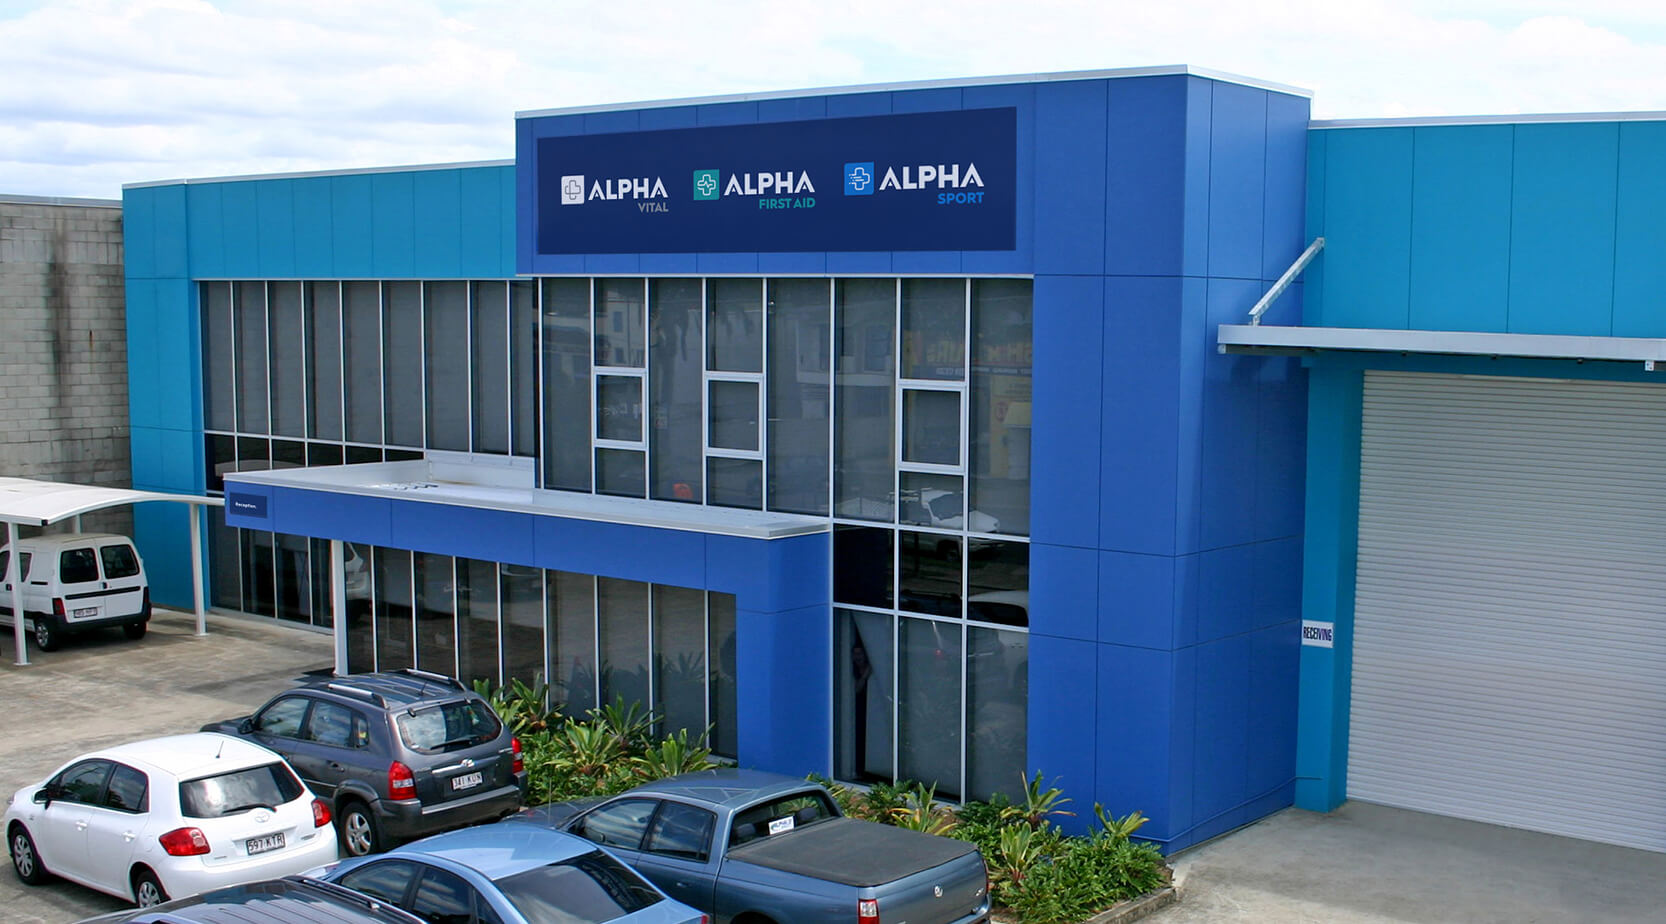 Alpha First Aid's Office and Warehouse